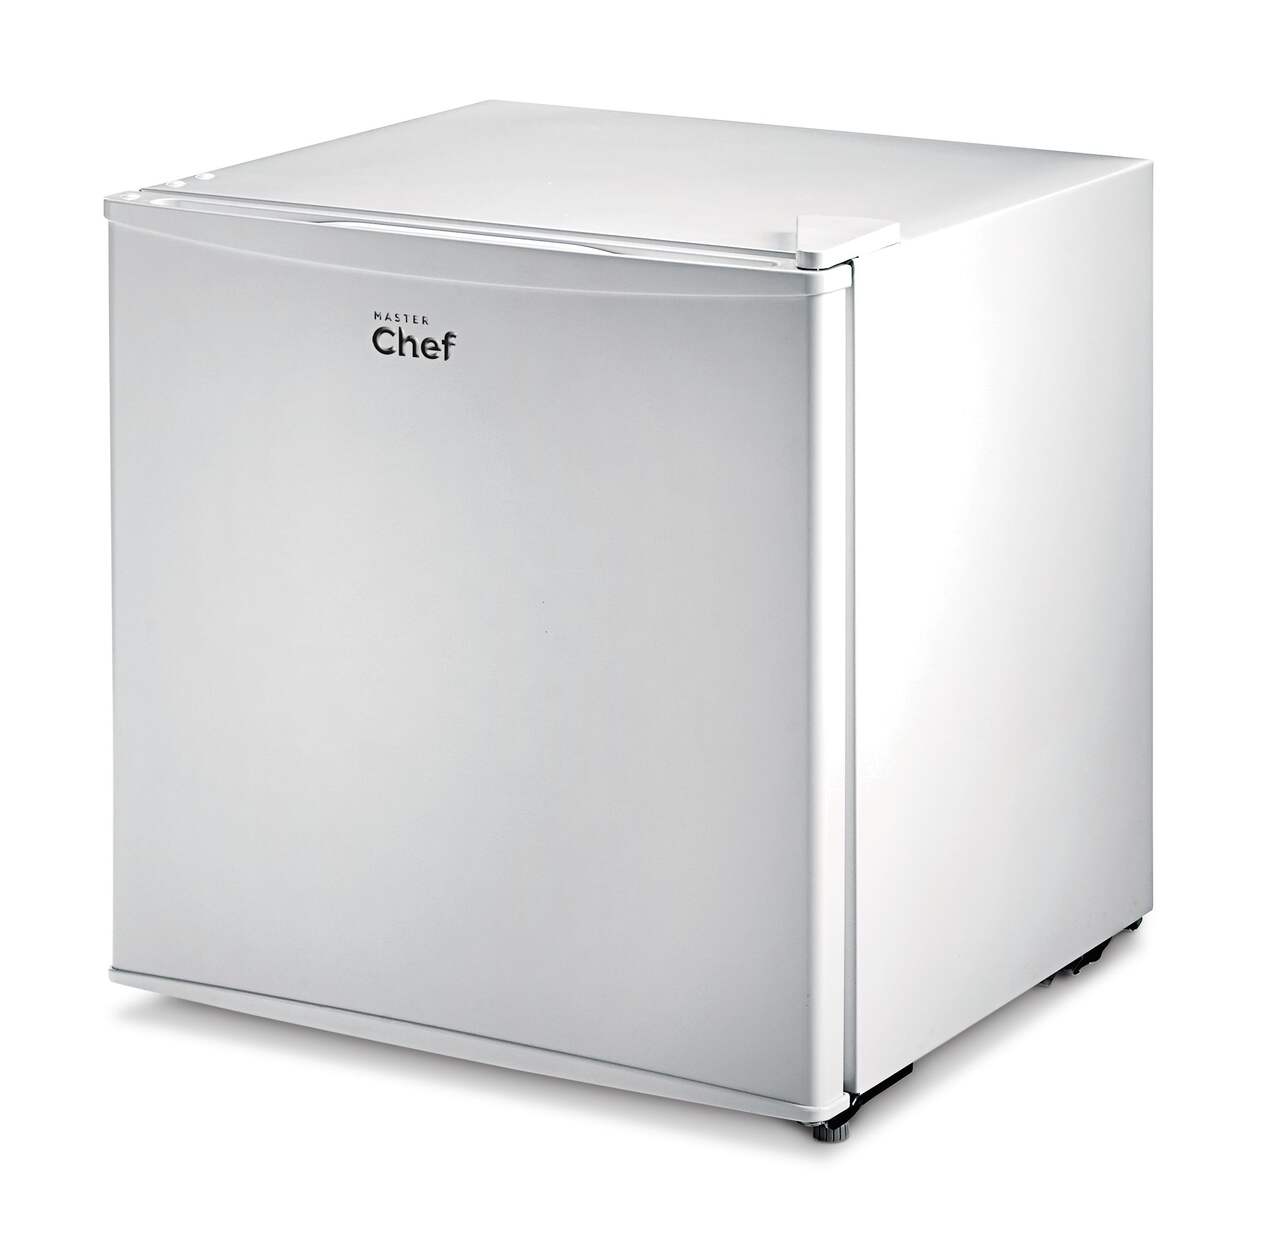 MASTER Chef Energy Star Compact Mini Bar Refrigerator Easy-To-Use